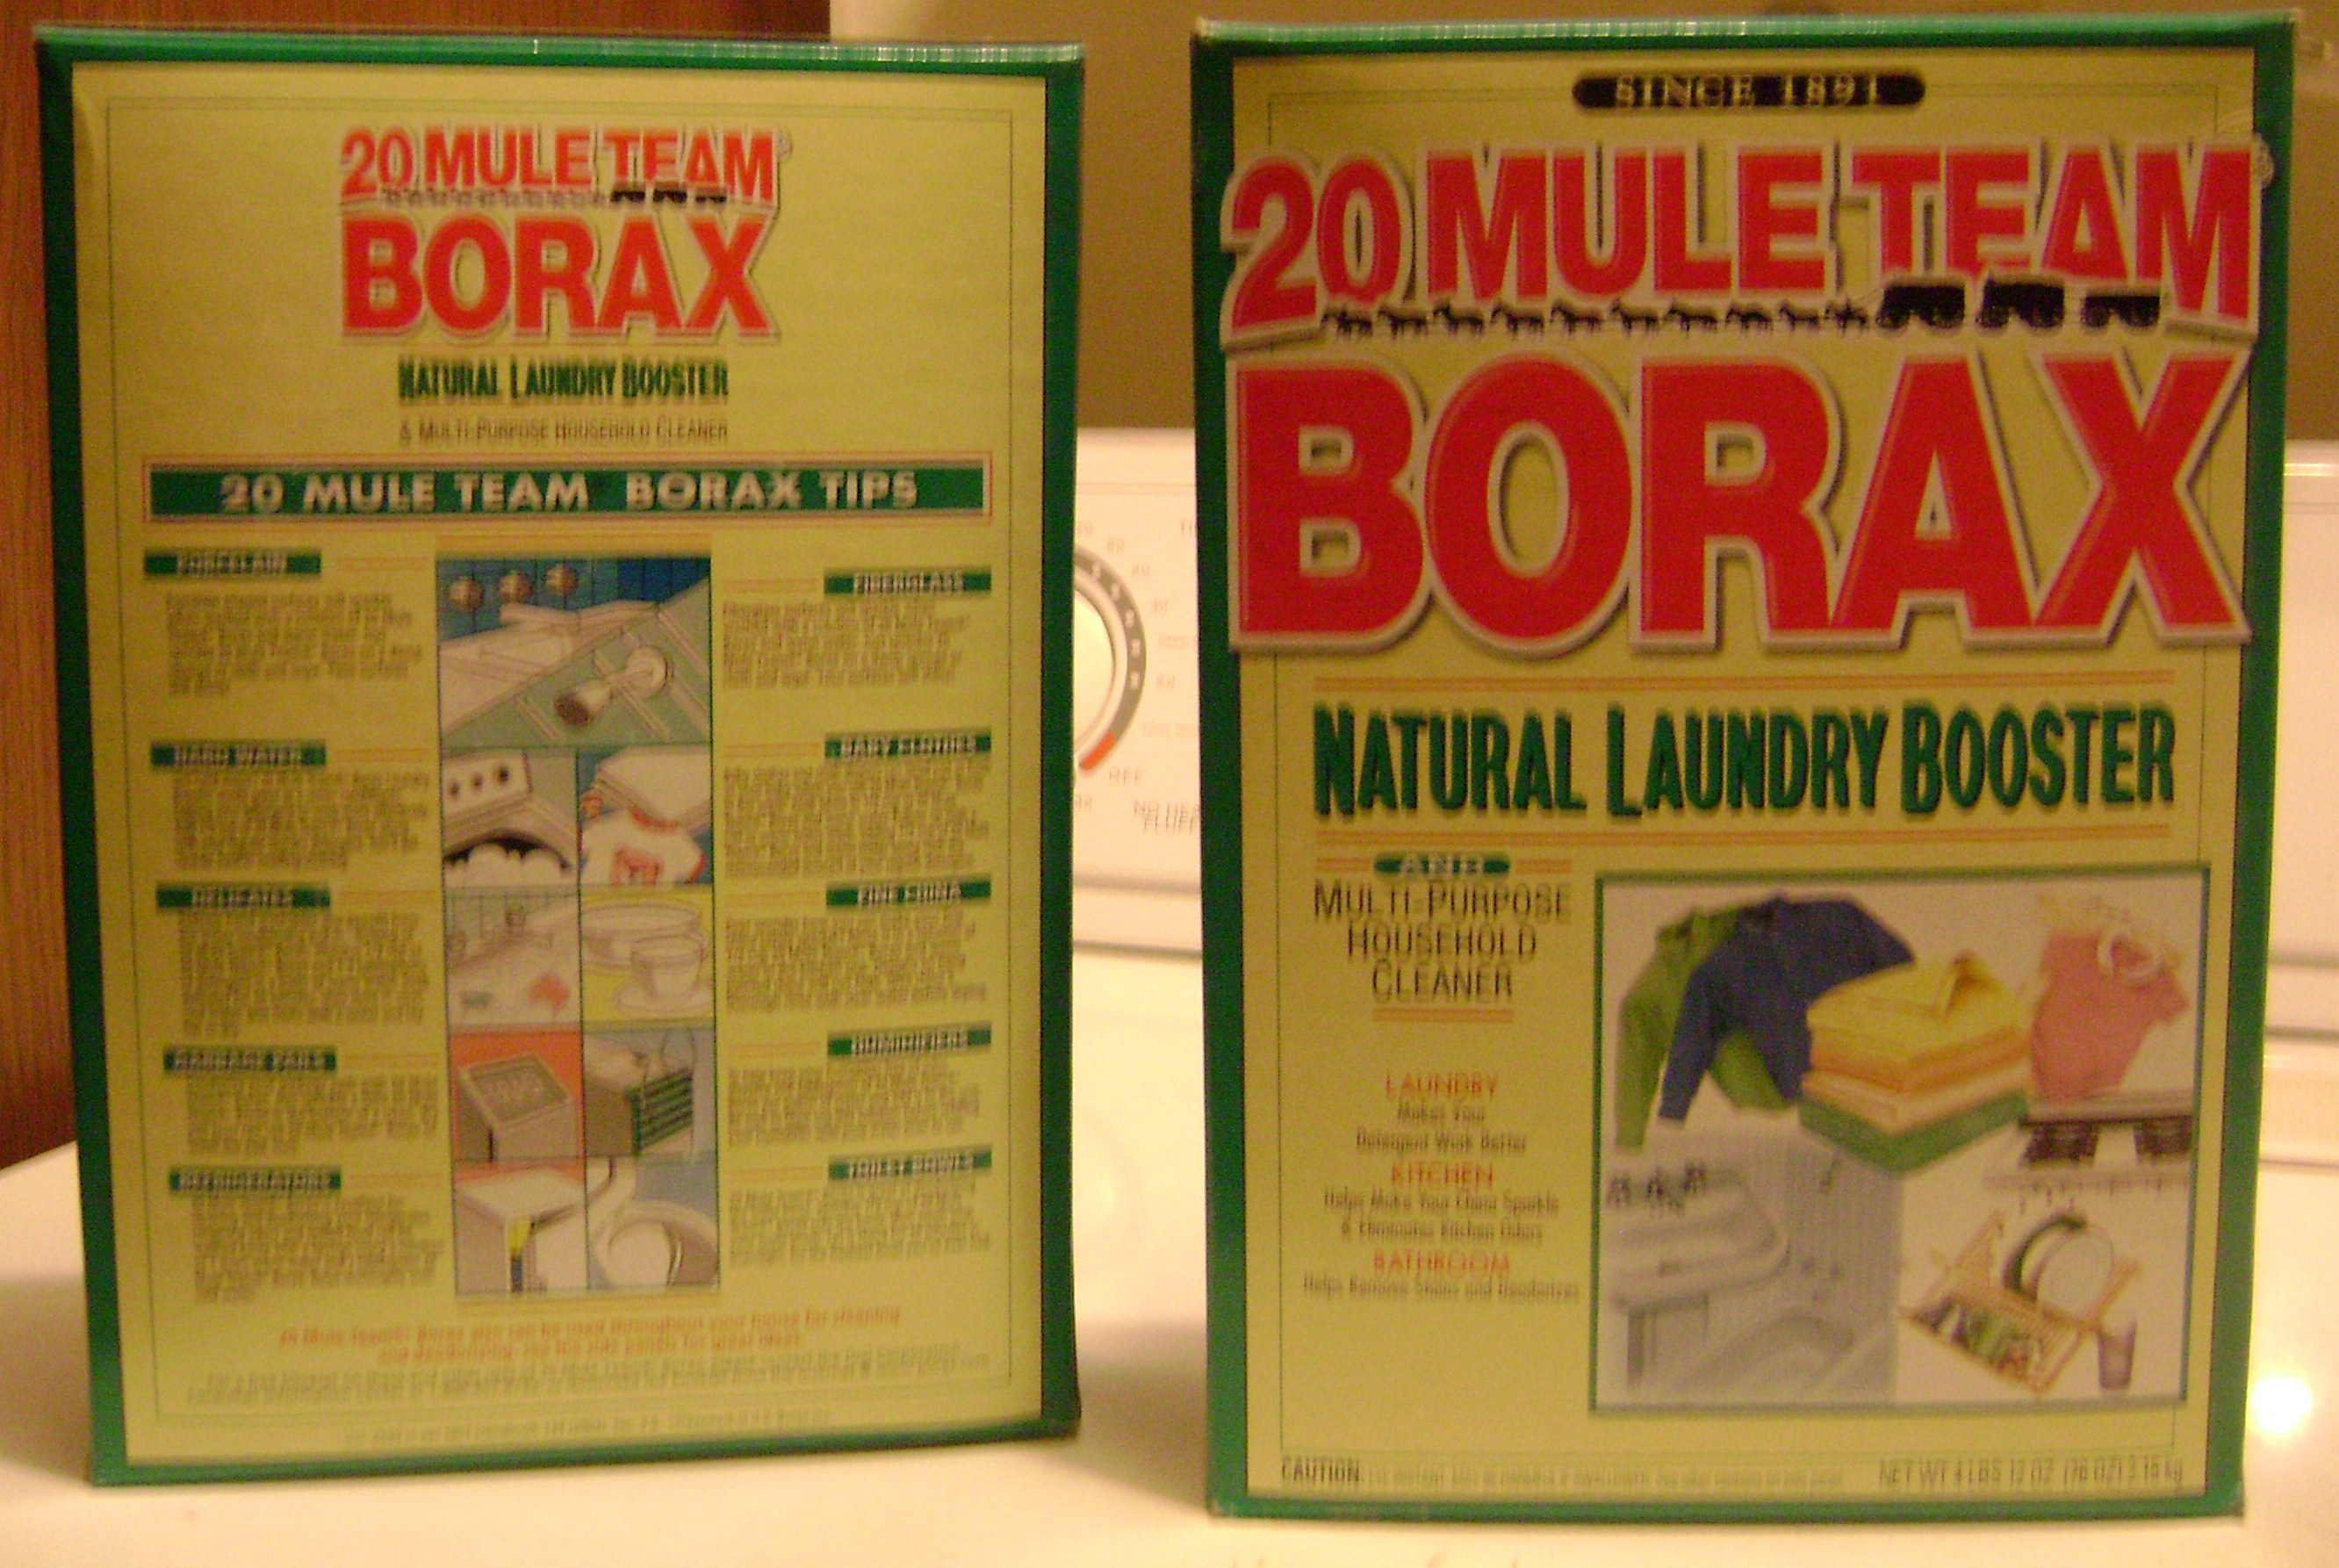 Borax kills scabies mites in your laundry!!